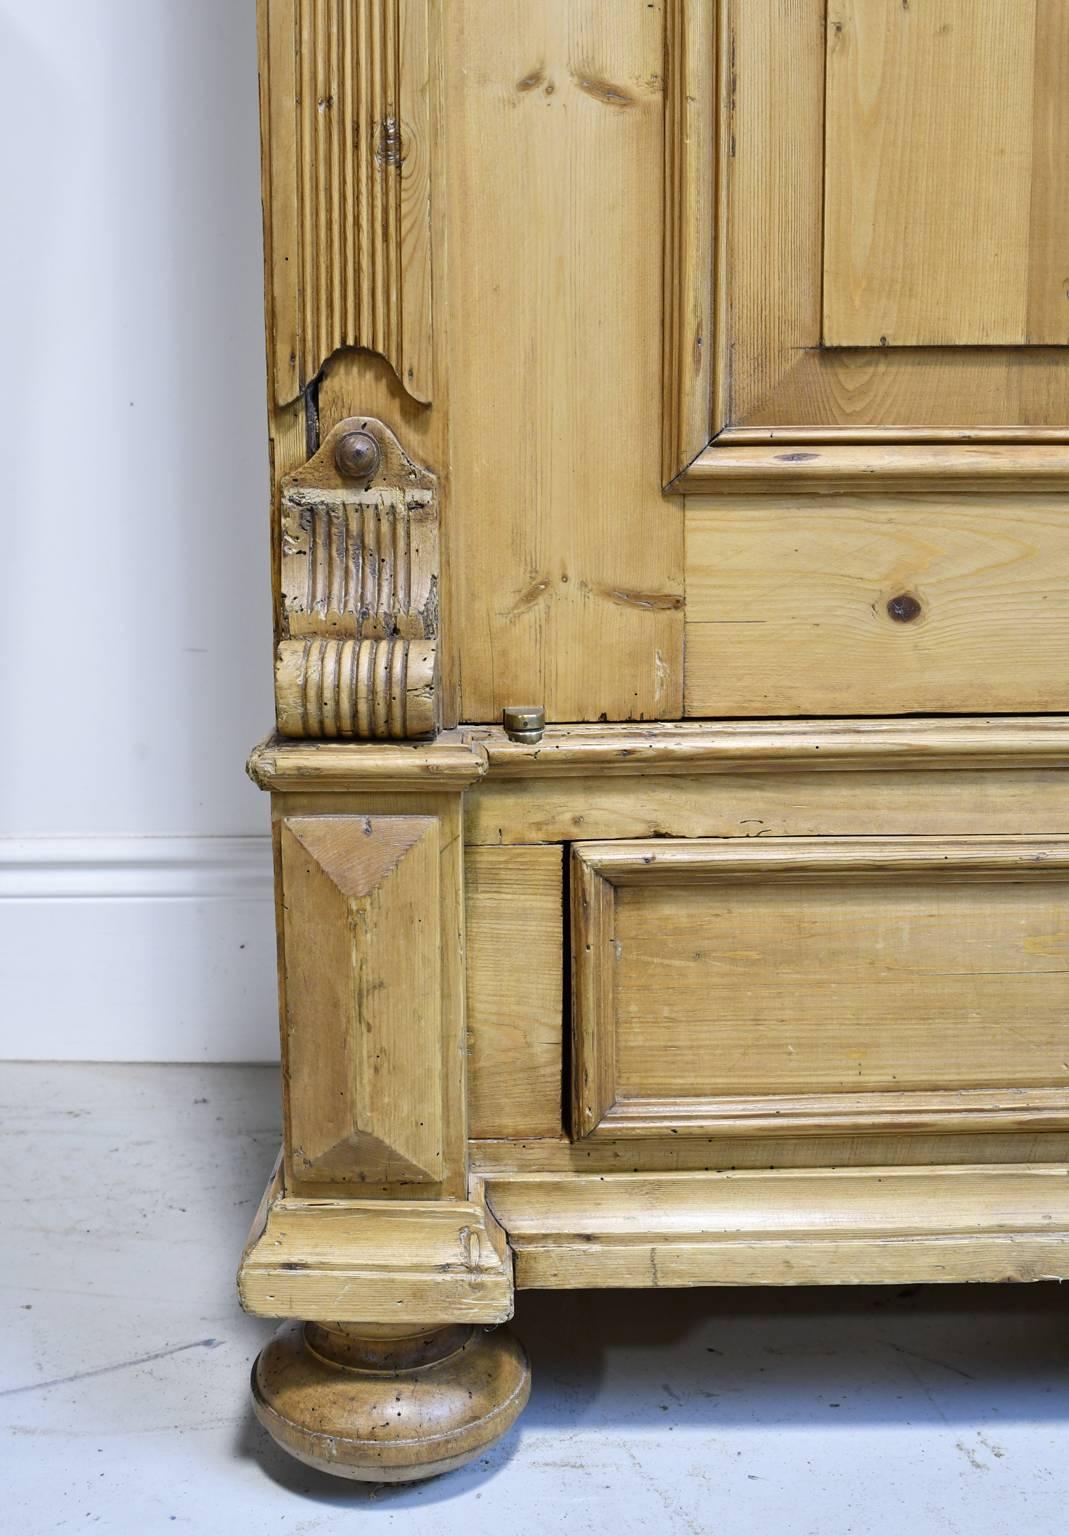 Belle Époque 19th Century European Two-Door Armoire in Pine with Drawers & Interior Shelves